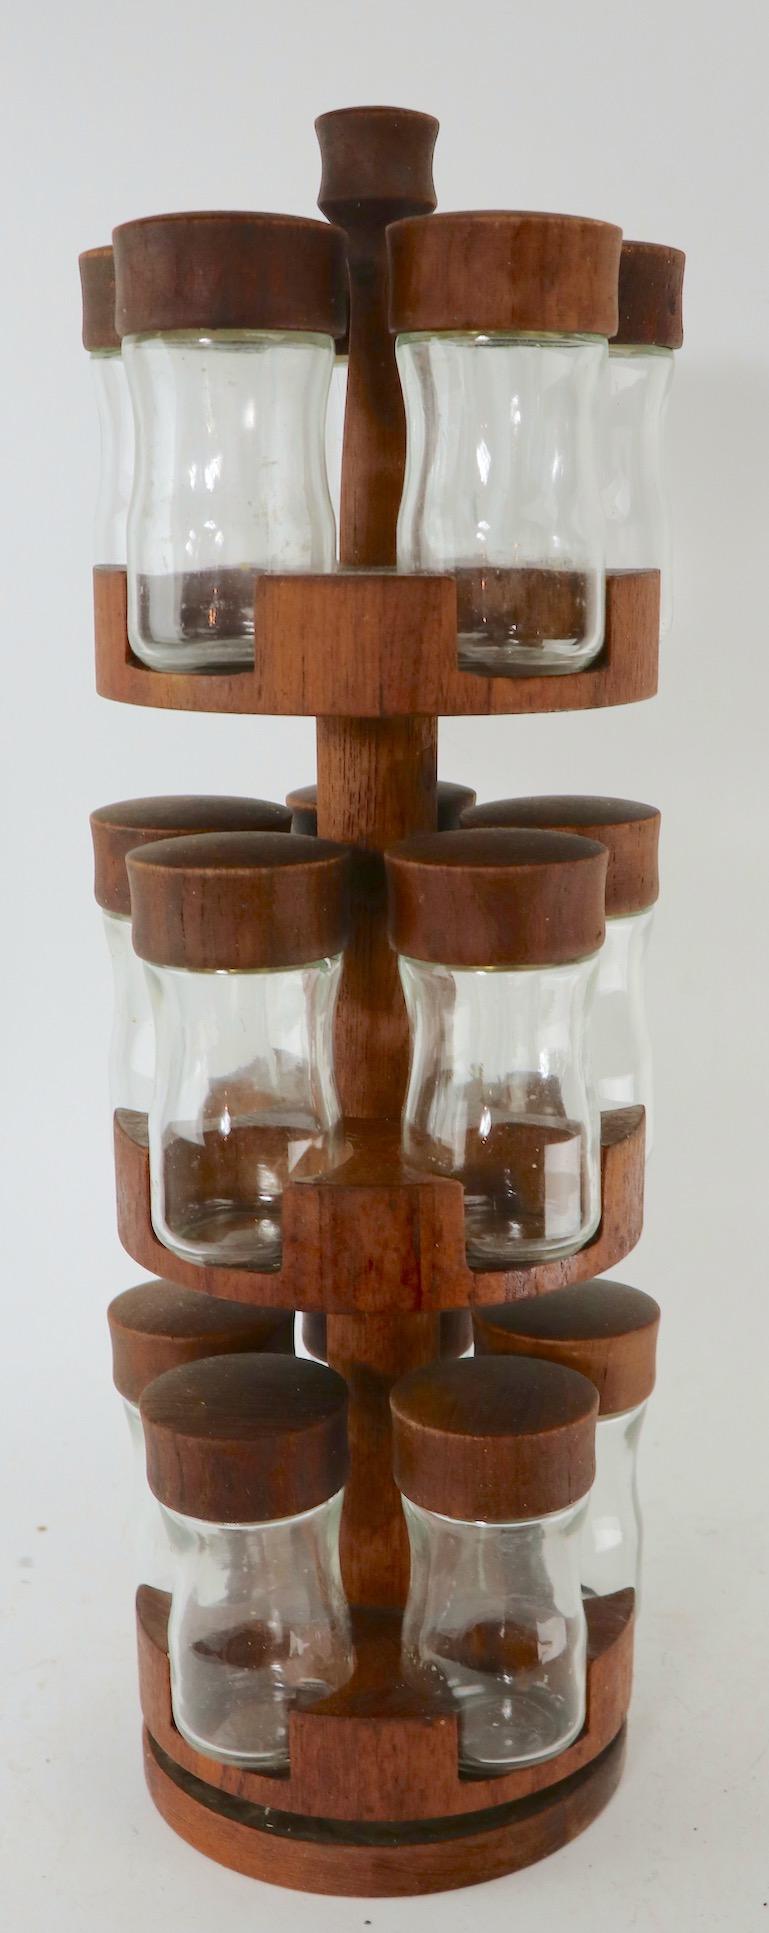 Unusual revolving three-tier teak and glass spice rack by Digsmed, Made in Denmark (Danmark). The teak stand has three circular shelves each holding five bottles, total 15 spice bottles. The glass spice jars have different styles of plastic caps, to